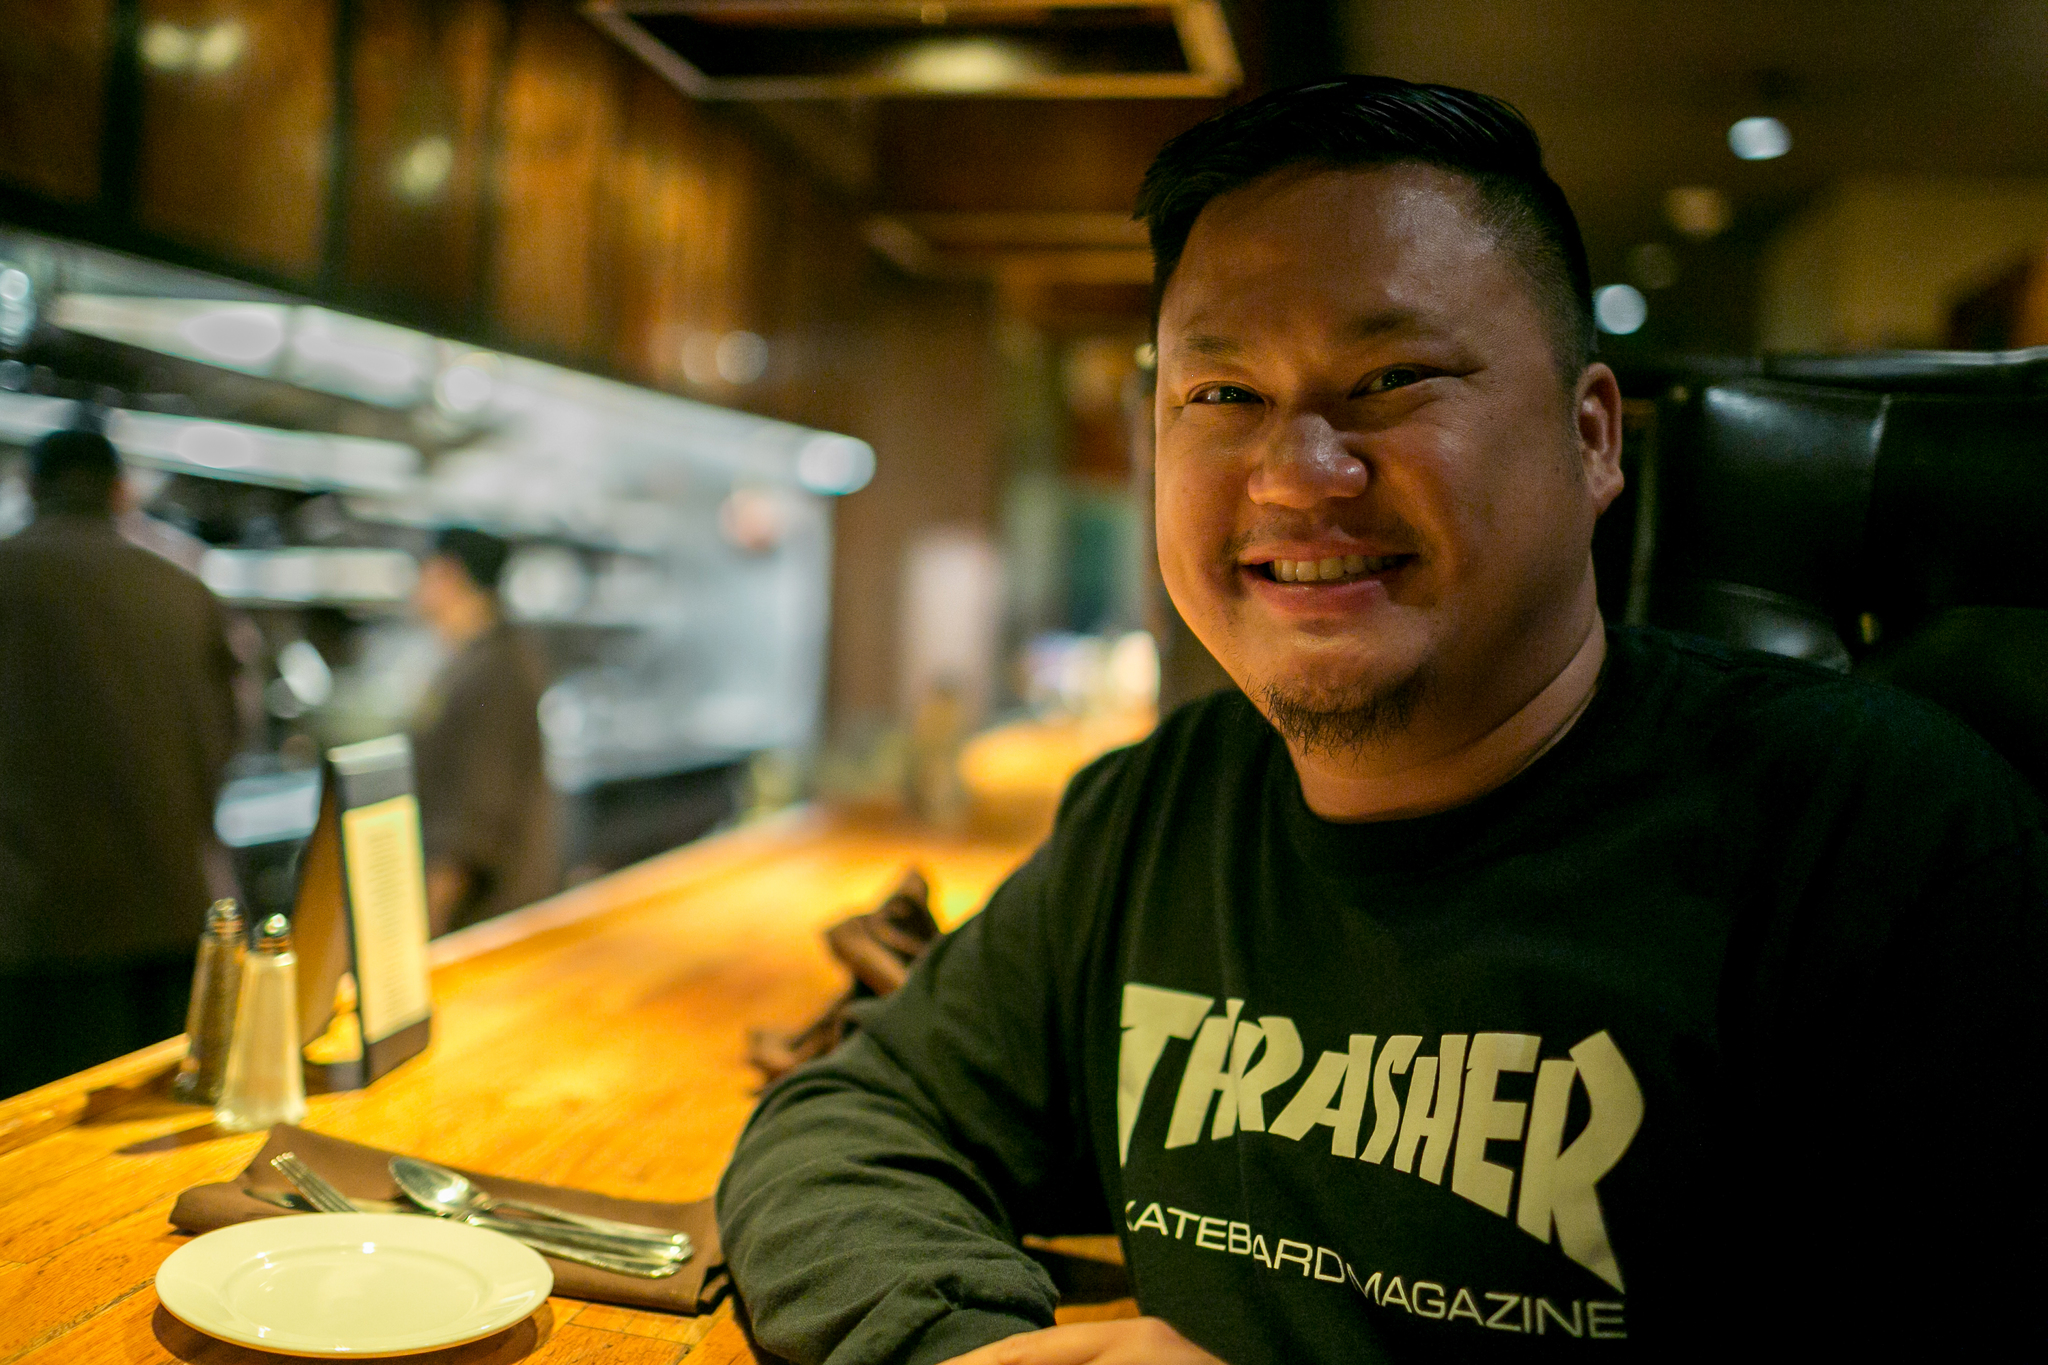 “I heard about 13 coins through Yelp. I saw the old school good food and decided to check it out. Normally, I go to 5-point but I wanted something new. I like the vibe, the high back chairs are really cool, and you can see the chefs cooking. I was really impressed by the decor when I came in.” -Trent Dang, 2:32 a.m.